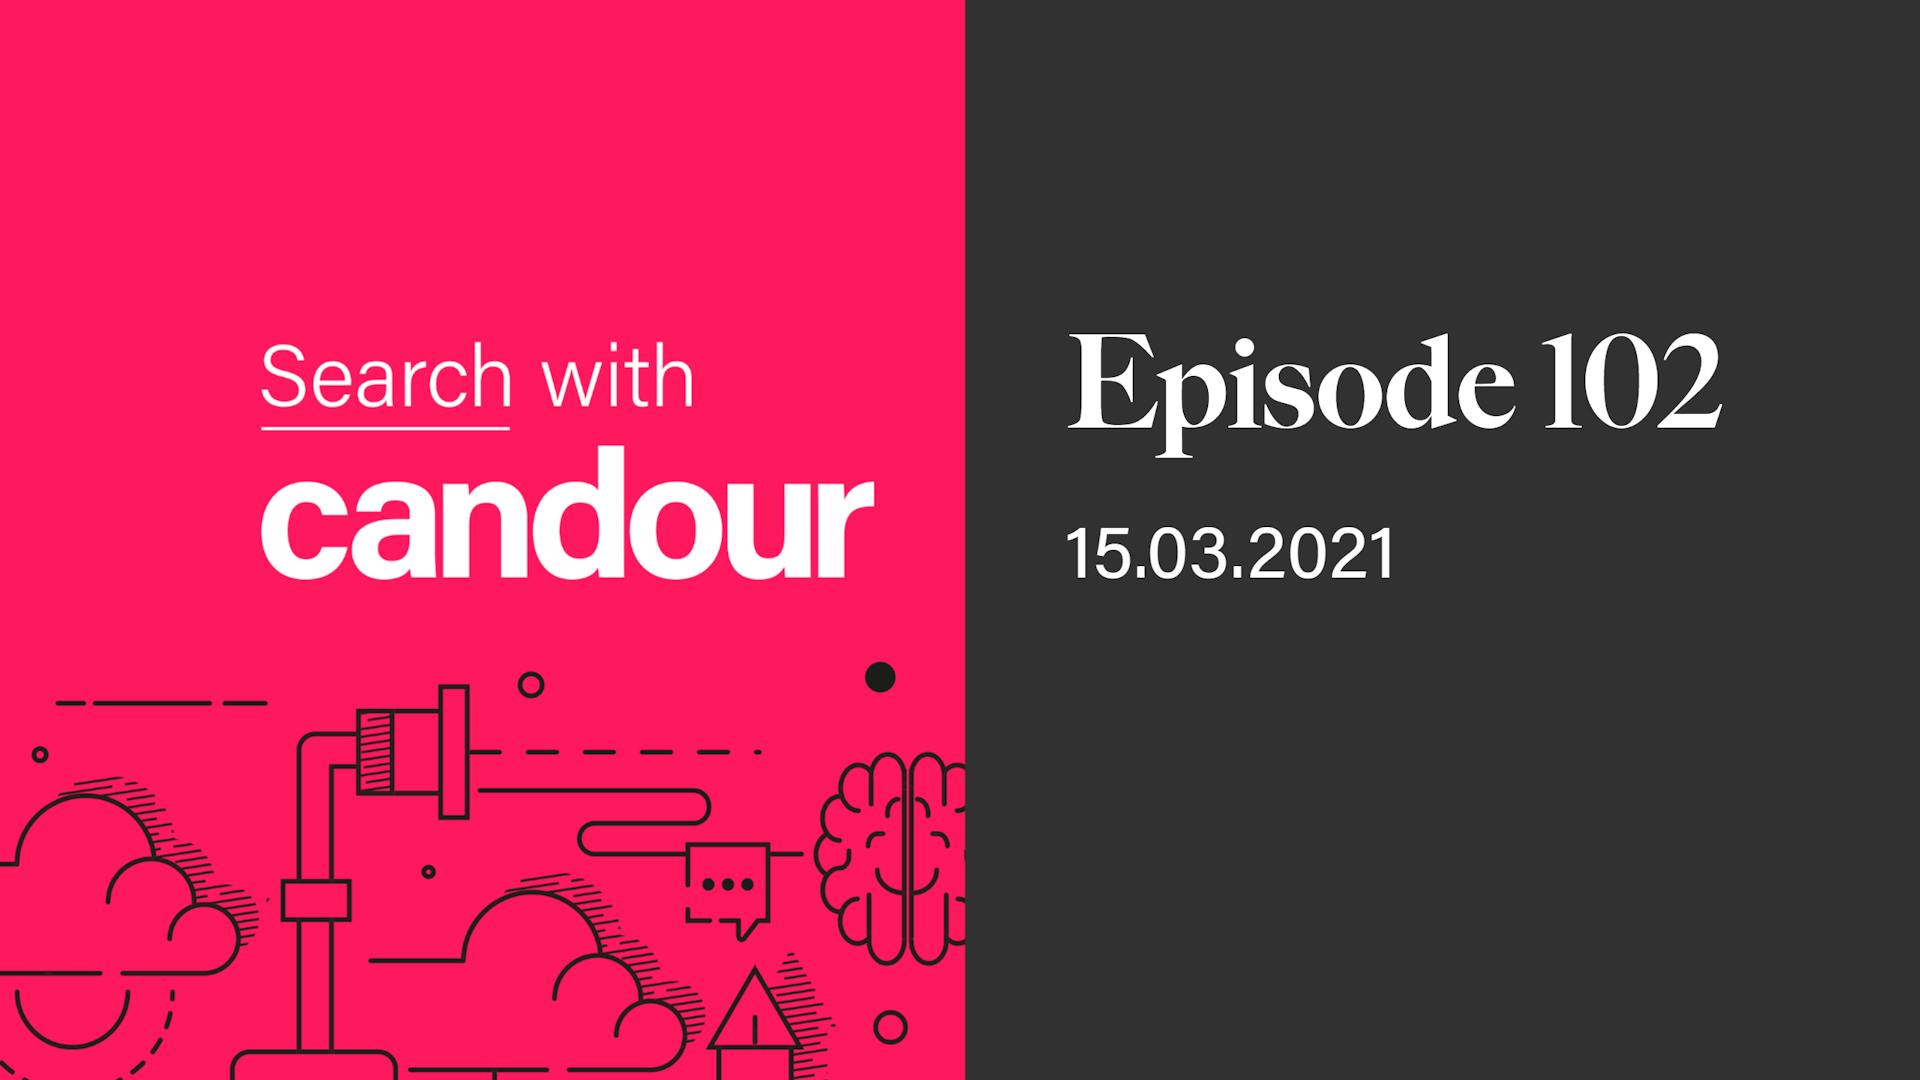 Episode 102 - Search with Candour